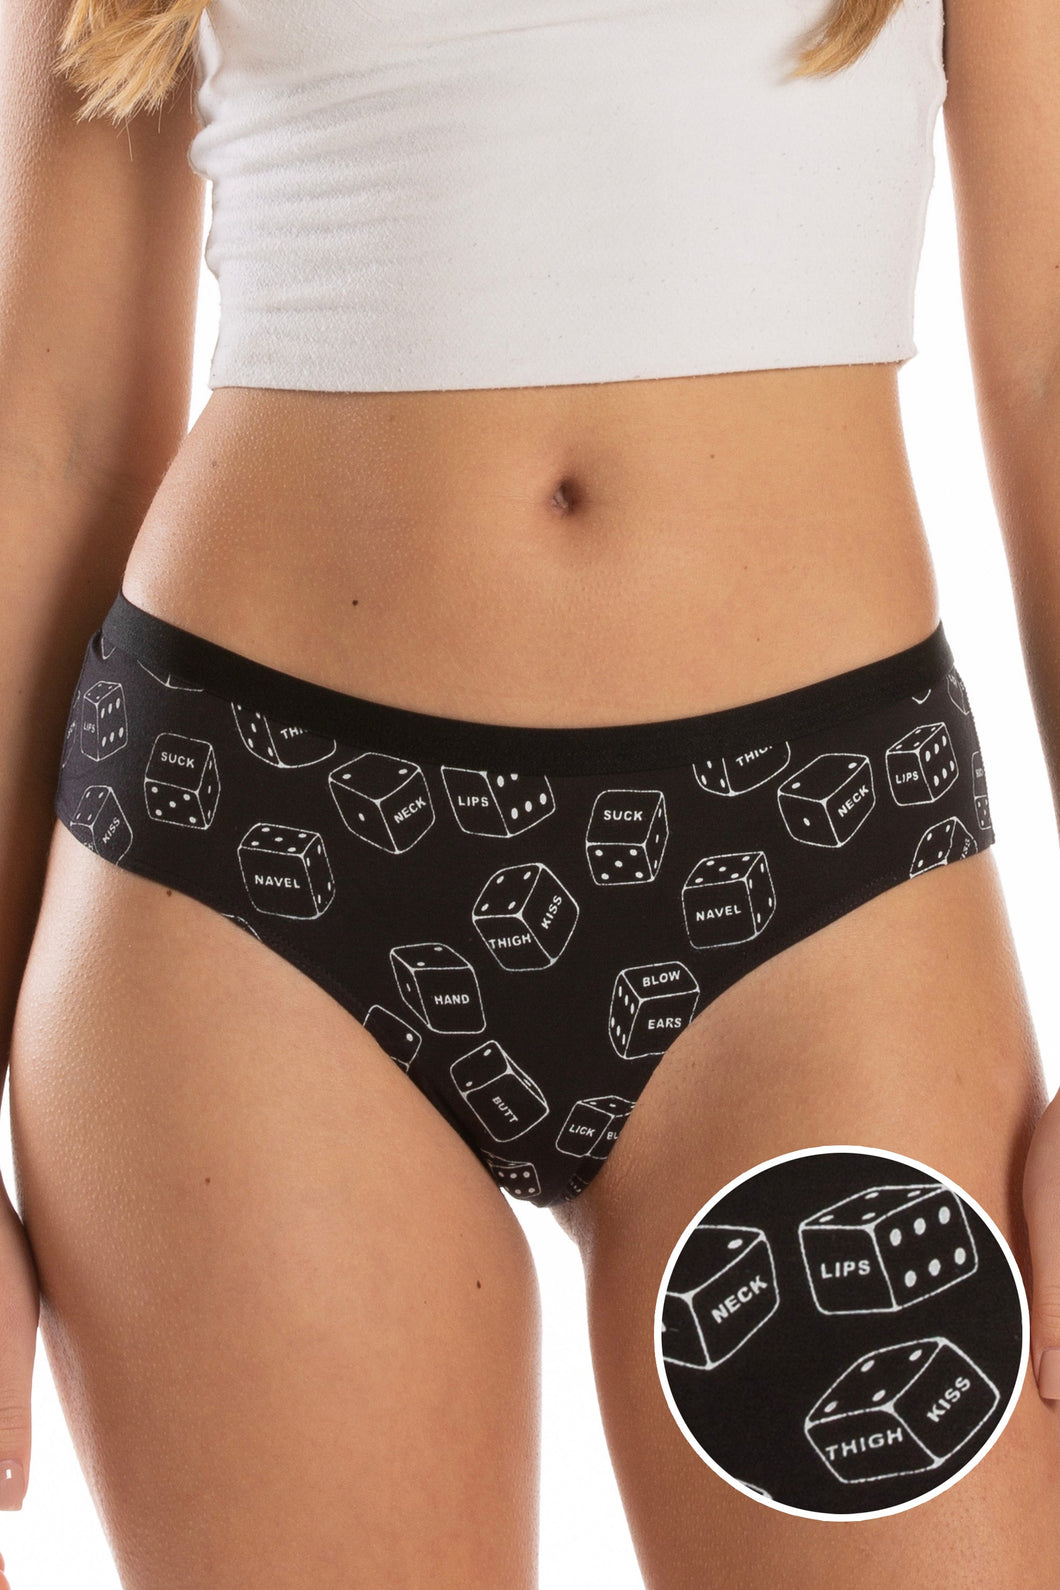 The Free For All | Glow In The Dark Dice Cheeky Underwear